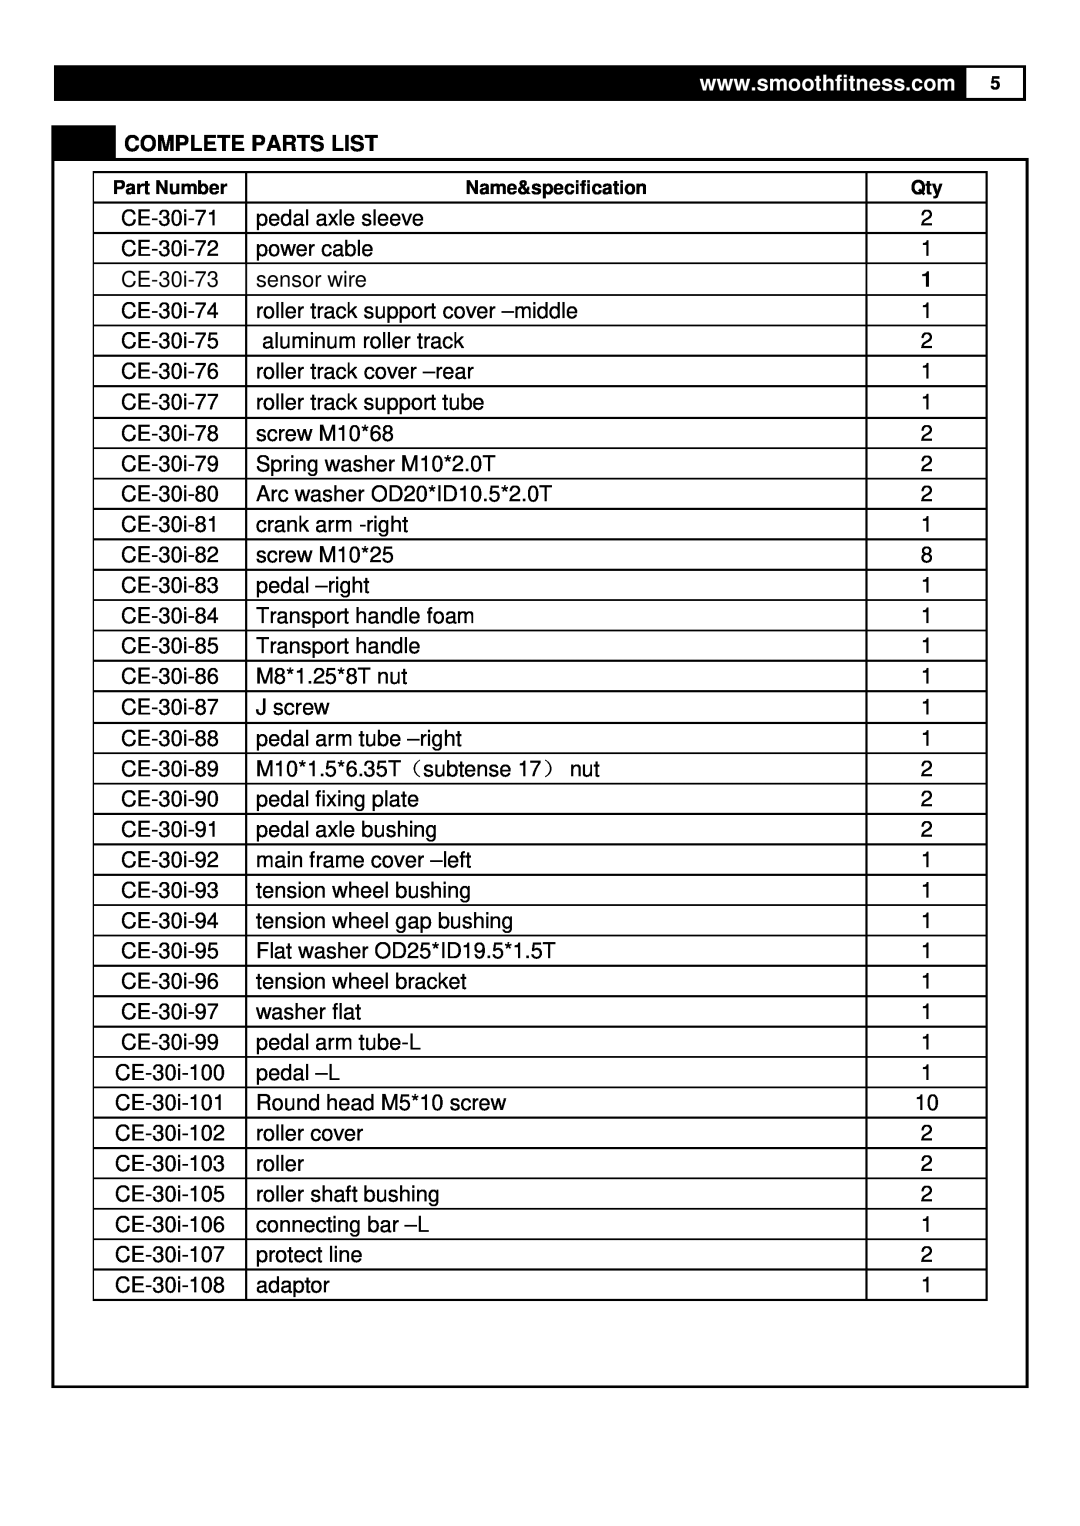 Smooth Fitness CE-3.0 user manual Complete Parts List, pedal axle sleeve 